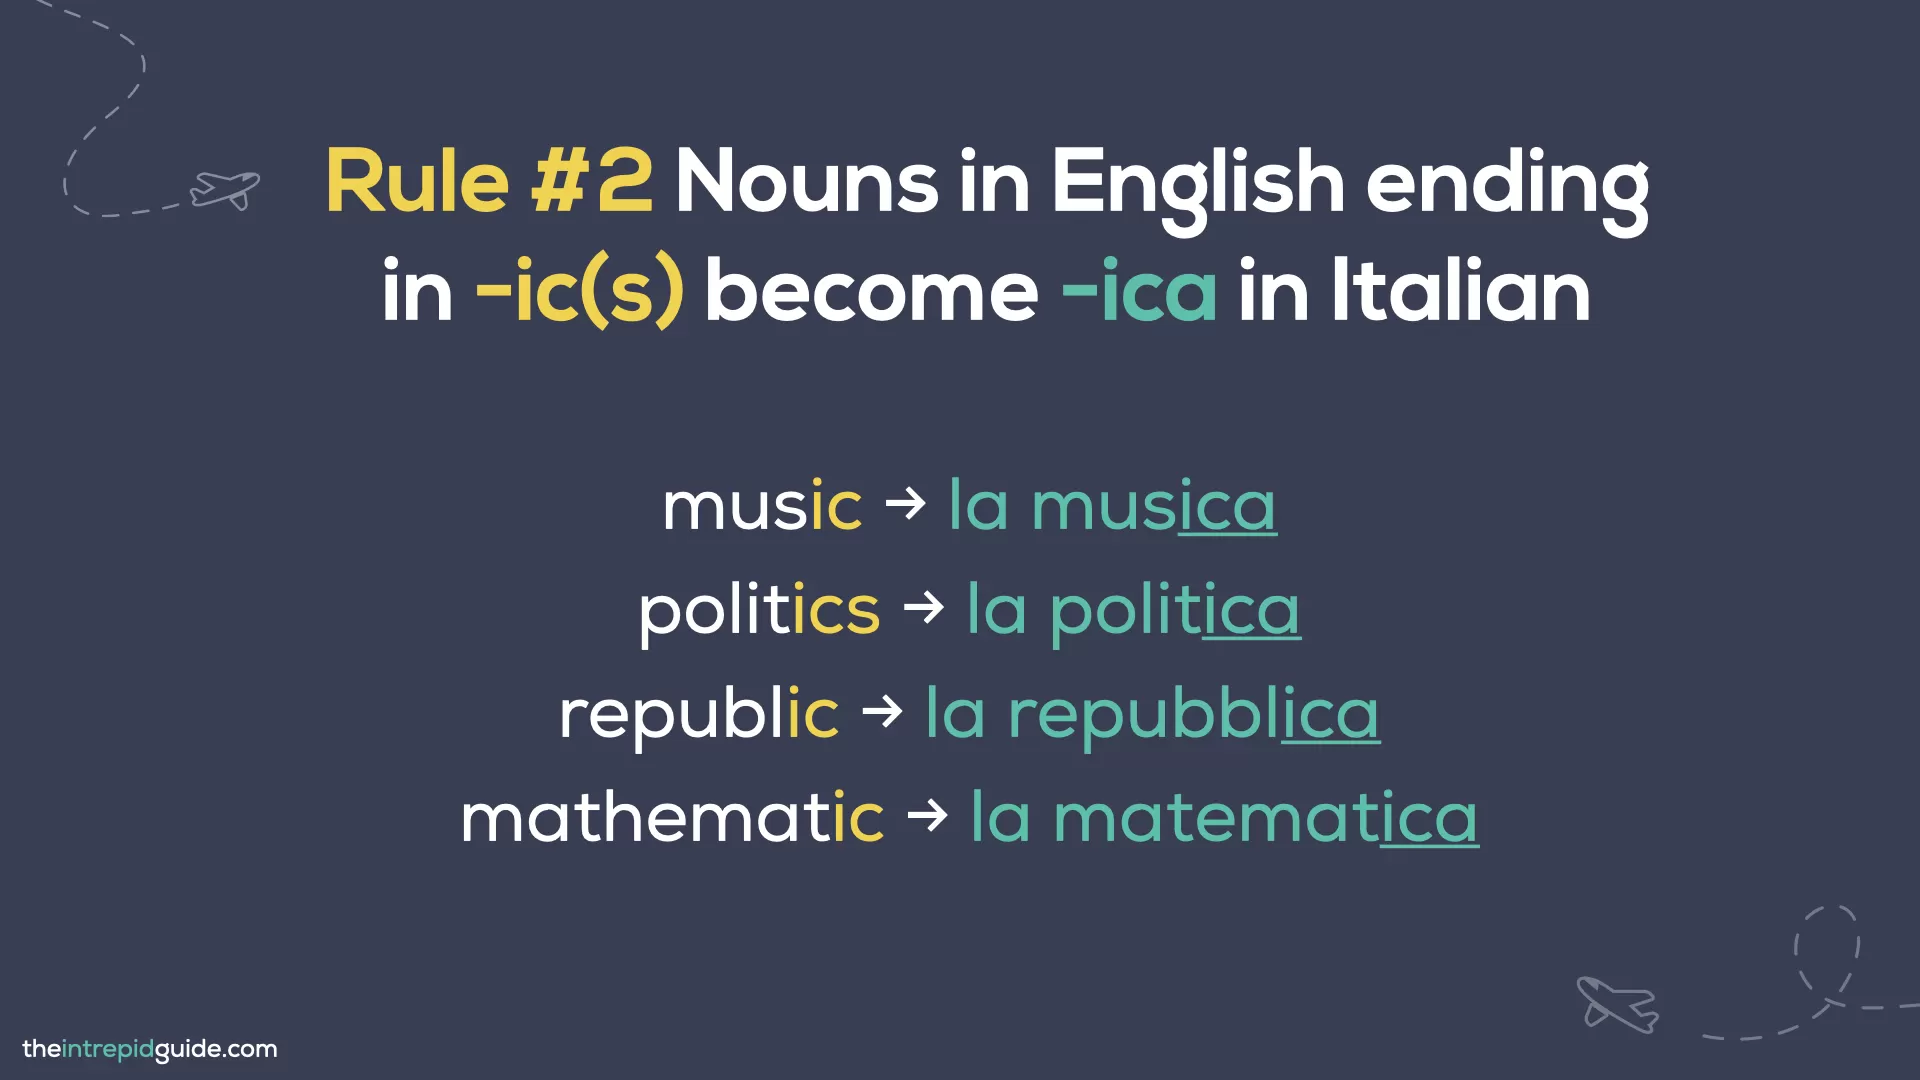 Italian cognates and loan words - Rule 2 - Nouns in English ending in -ic(s) become -ica in Italian